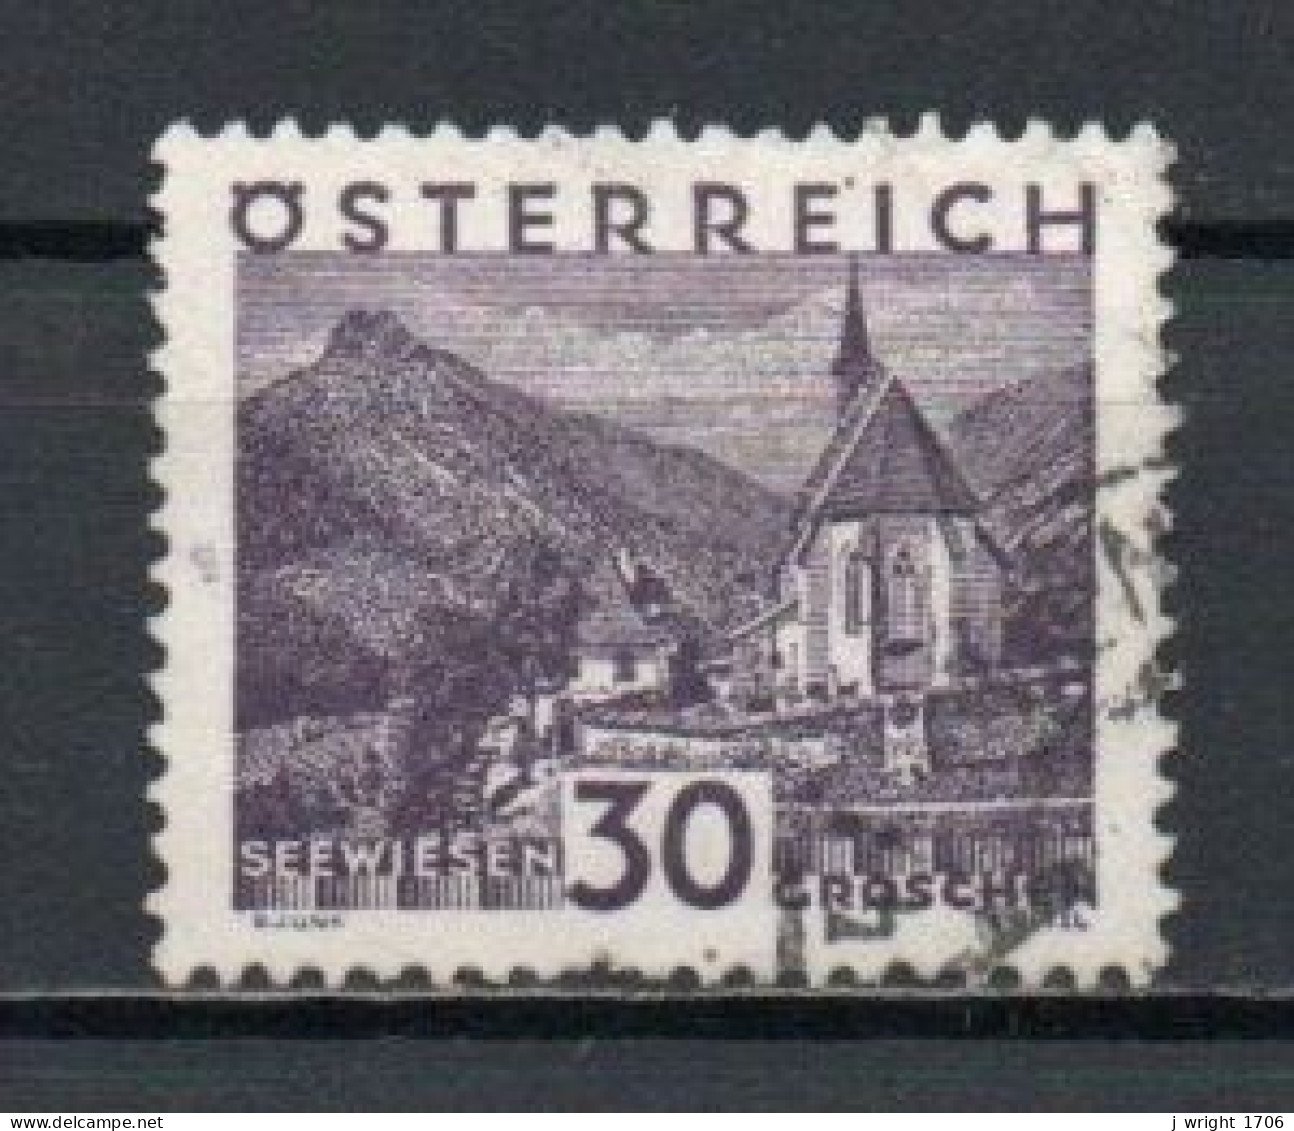 Austria, 1929, Landscapes Large Format/Seewiesen, 30g, USED - Used Stamps